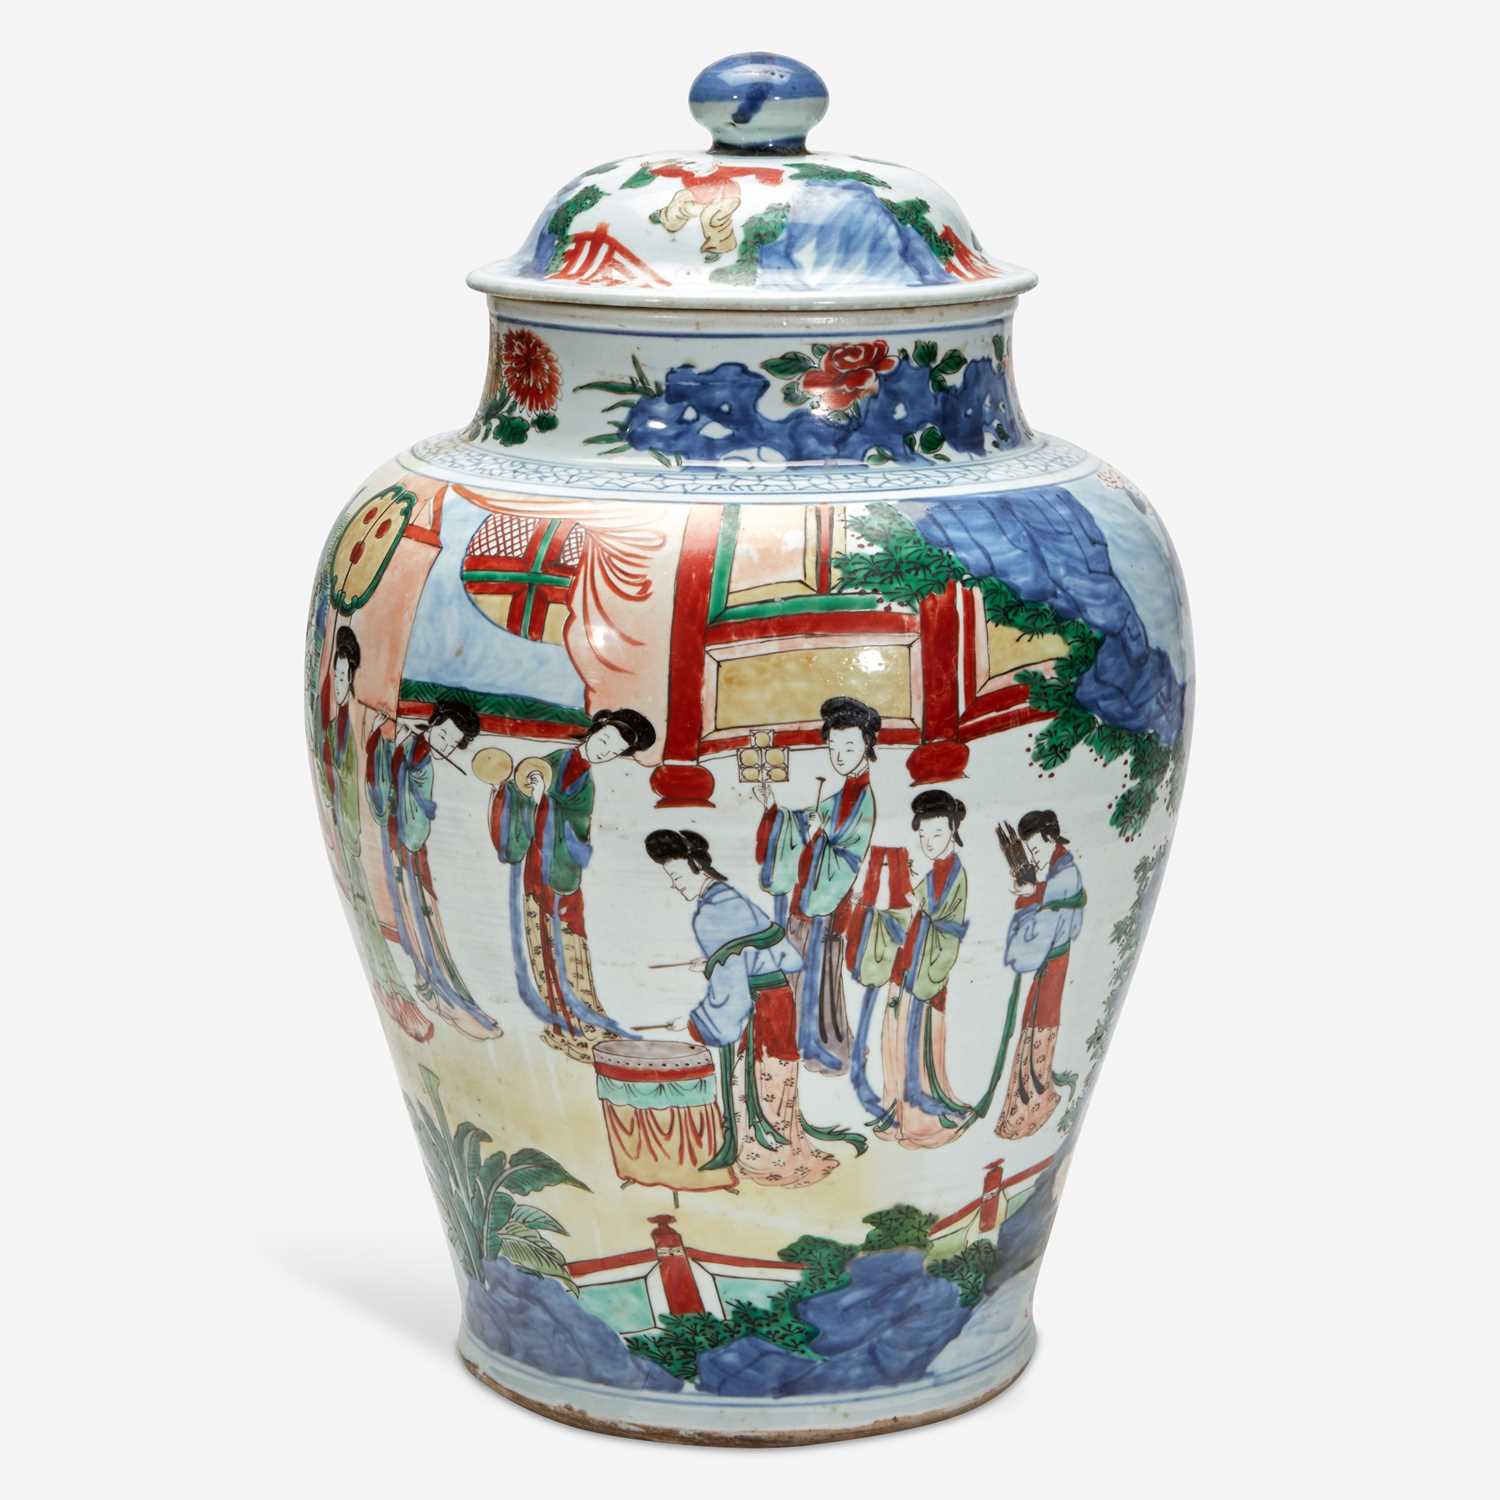 Lot 86 - A large Chinese wucai-decorated porcelain jar and cover 五彩带盖大罐